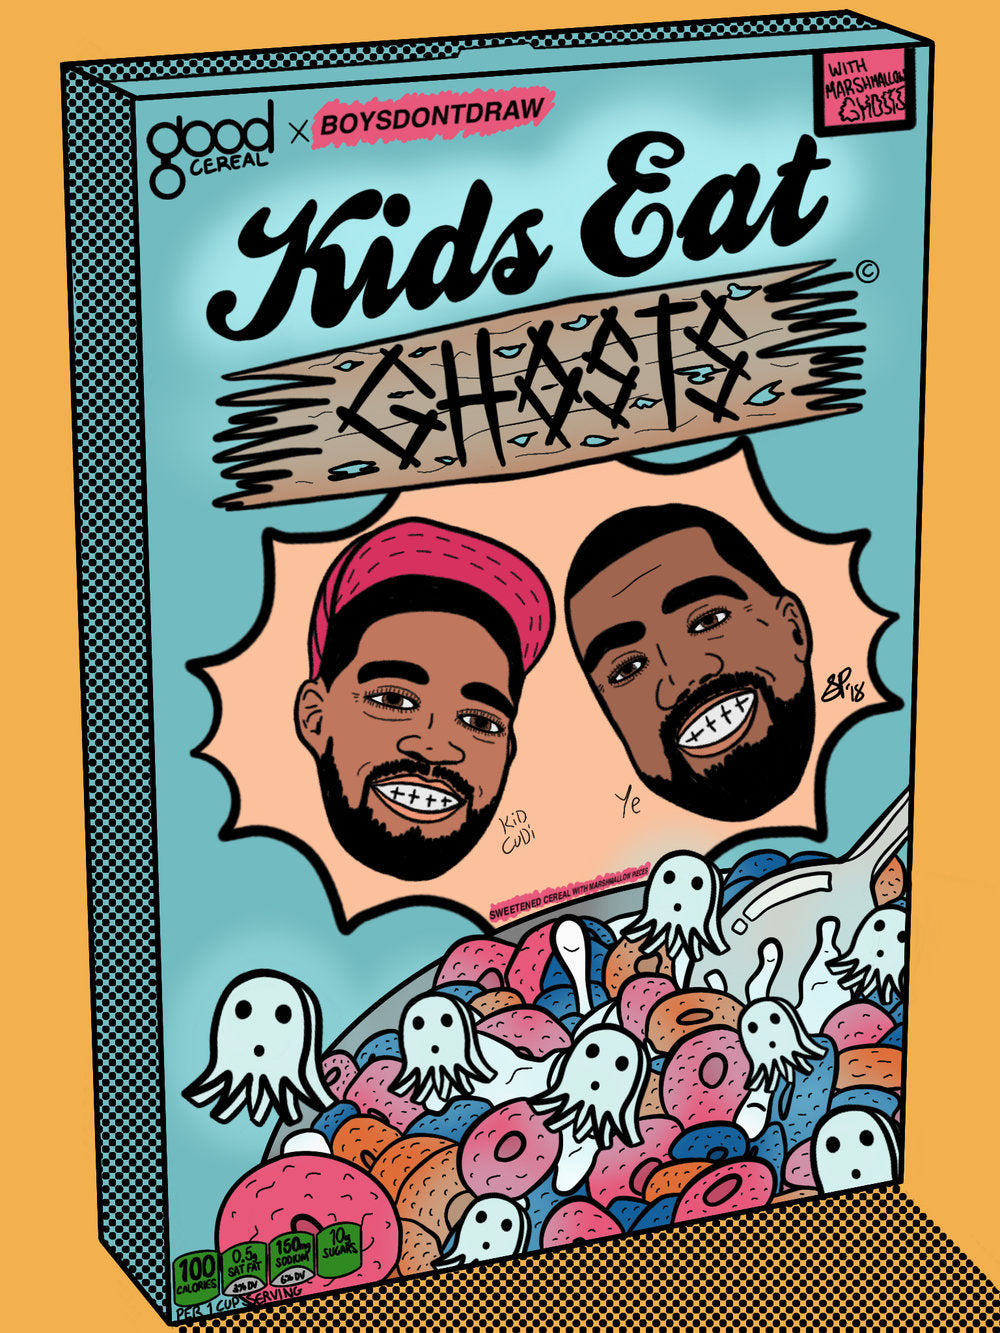 KIDS SEE GHOSTS - KIDS EAT GHOSTS - Limited Print by BOYSDONTDRAW